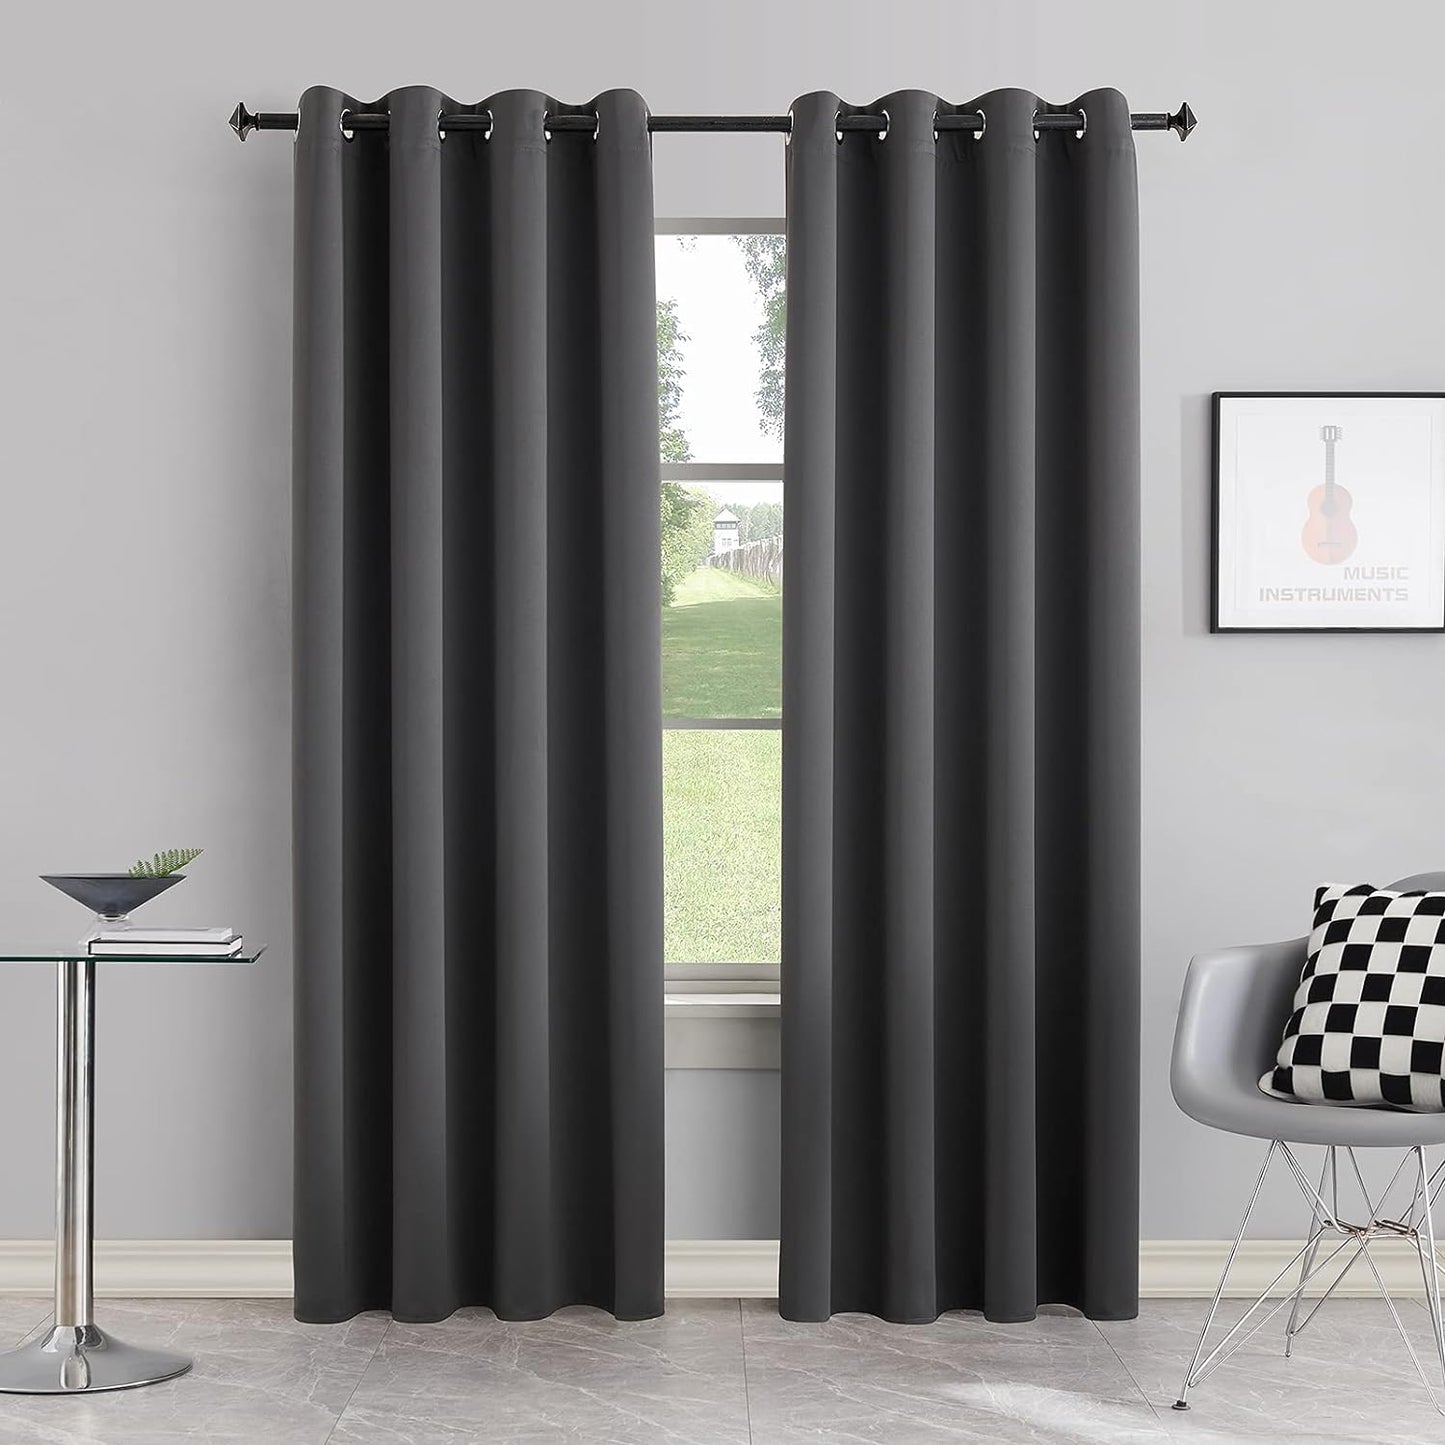 BERSWAY 99% Blackout Curtains & Drapes Panels 84 Inches Darkening Curtains - Thermal Insulated Curtain for Bedroom-Red 84 Inches Long Grommet Window Curtain 2 Panels Set,W 52" X L 84"  BERSWAY Dark Gray 52"Wx63"L 